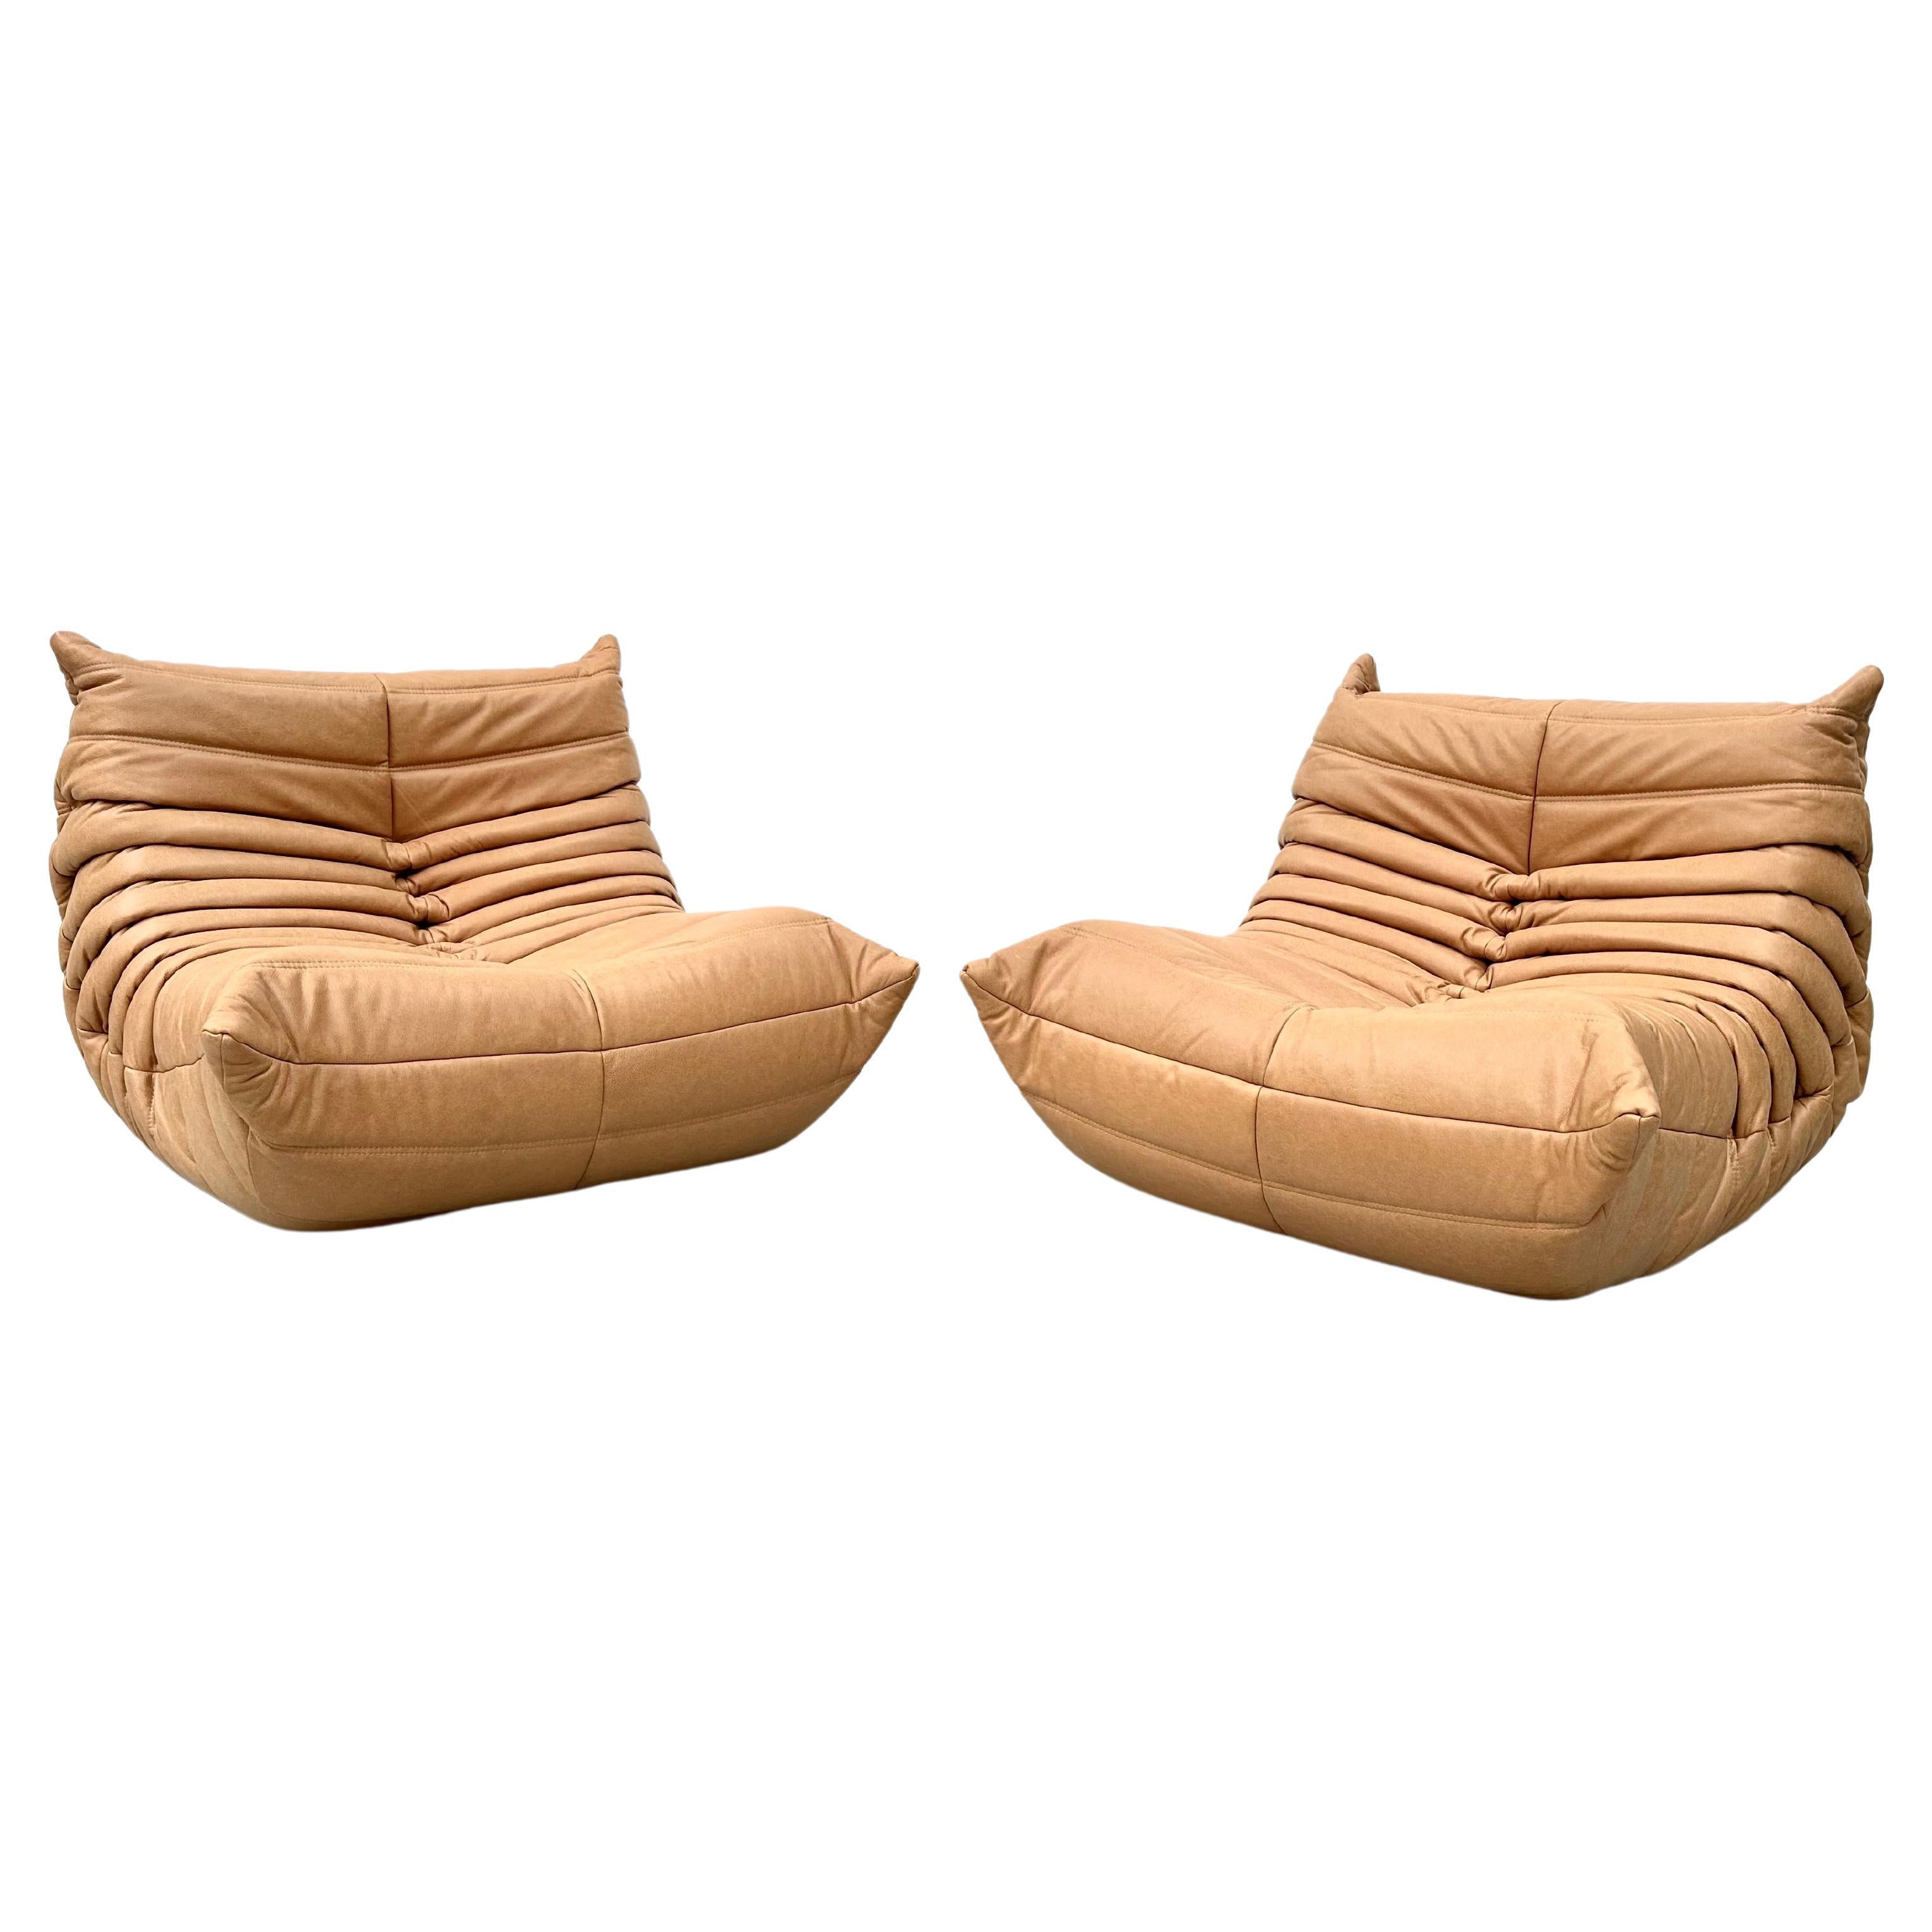 French Togo Chairs in Camel Leather by Michel Ducaroy for Ligne Roset.